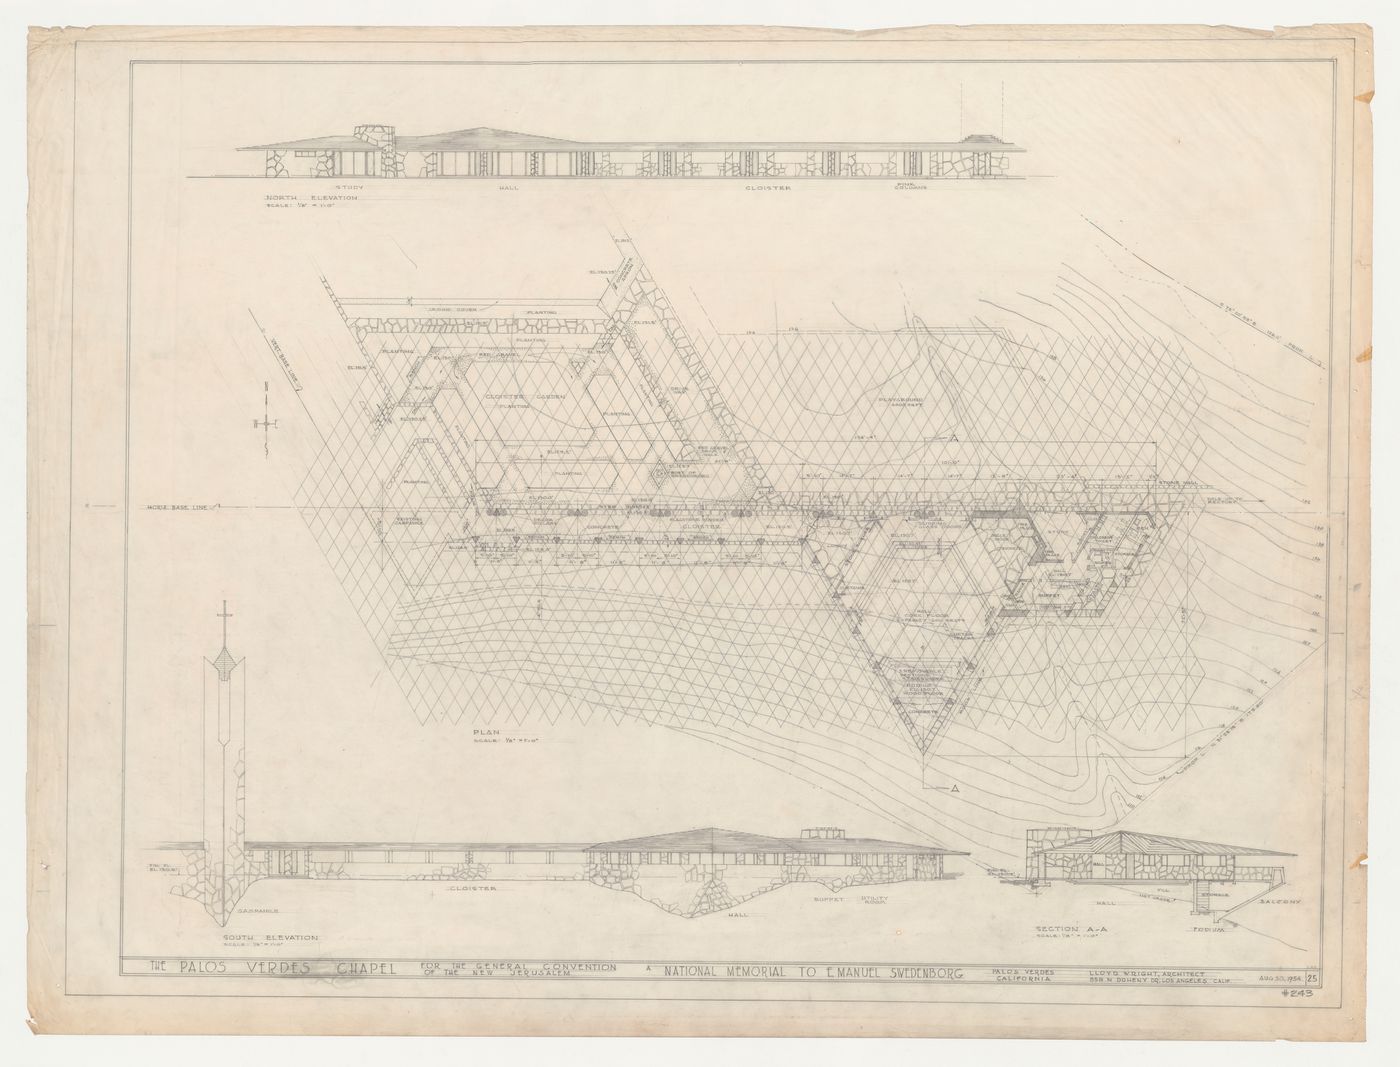 Wayfarers' Chapel, Palos Verdes, California: Plan developed on an equilateral parallelogram grid, north and south elevations and section for the cloister, cloister garden and parish house, including campanile as-built